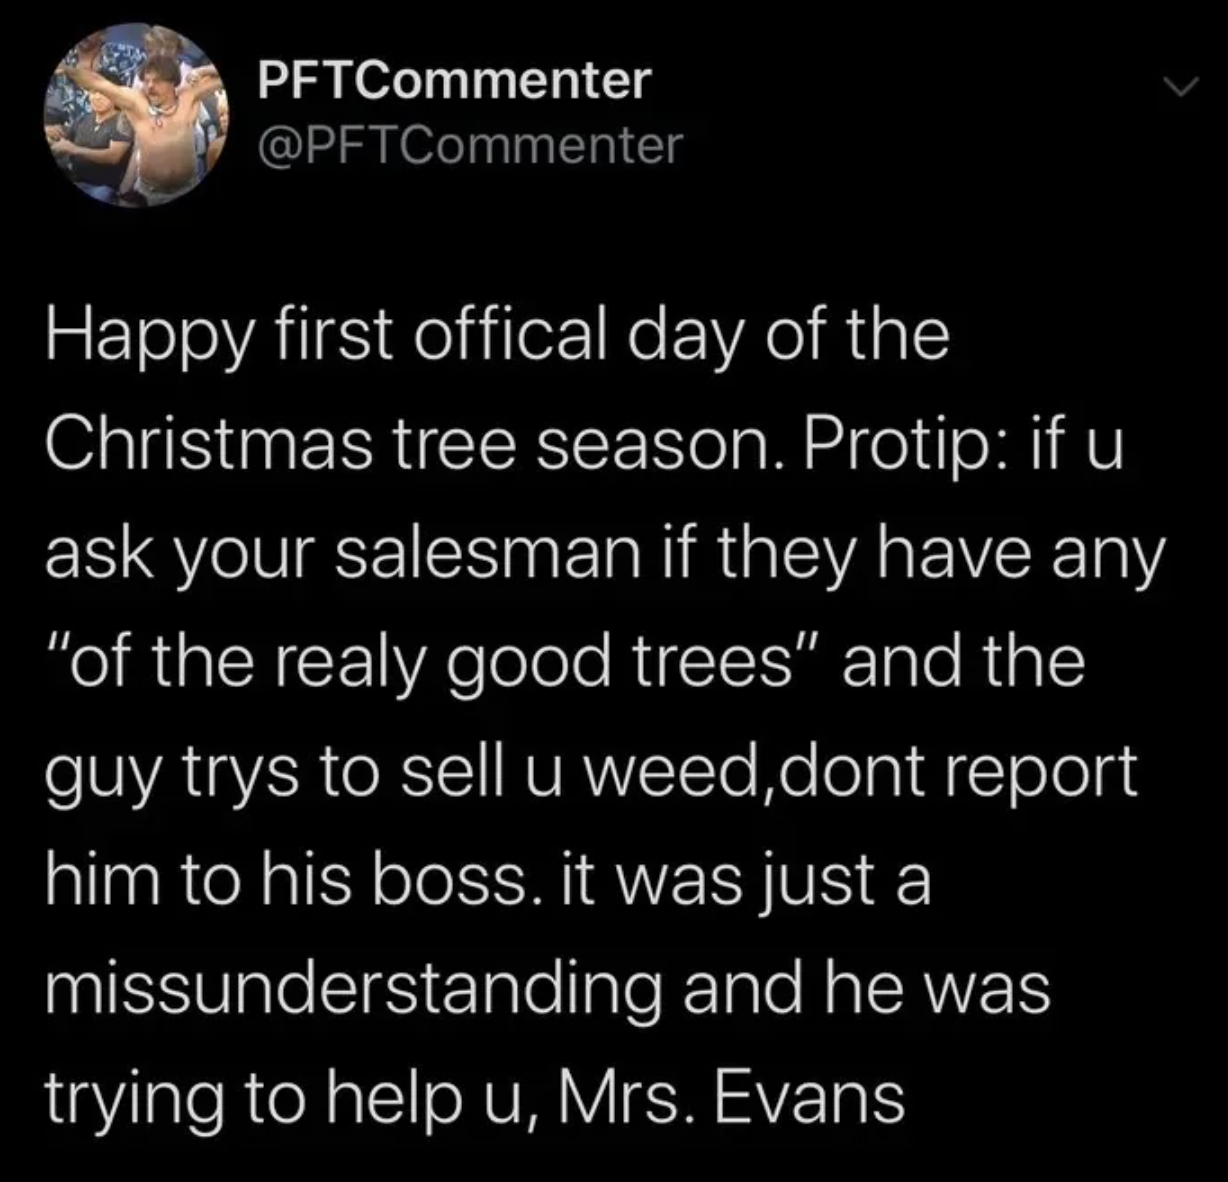 astronomical object - PFTCommenter Happy first offical day of the Christmas tree season. Protip if u ask your salesman if they have any "of the realy good trees" and the guy trys to sell u weed,dont report him to his boss. it was just a missunderstanding 